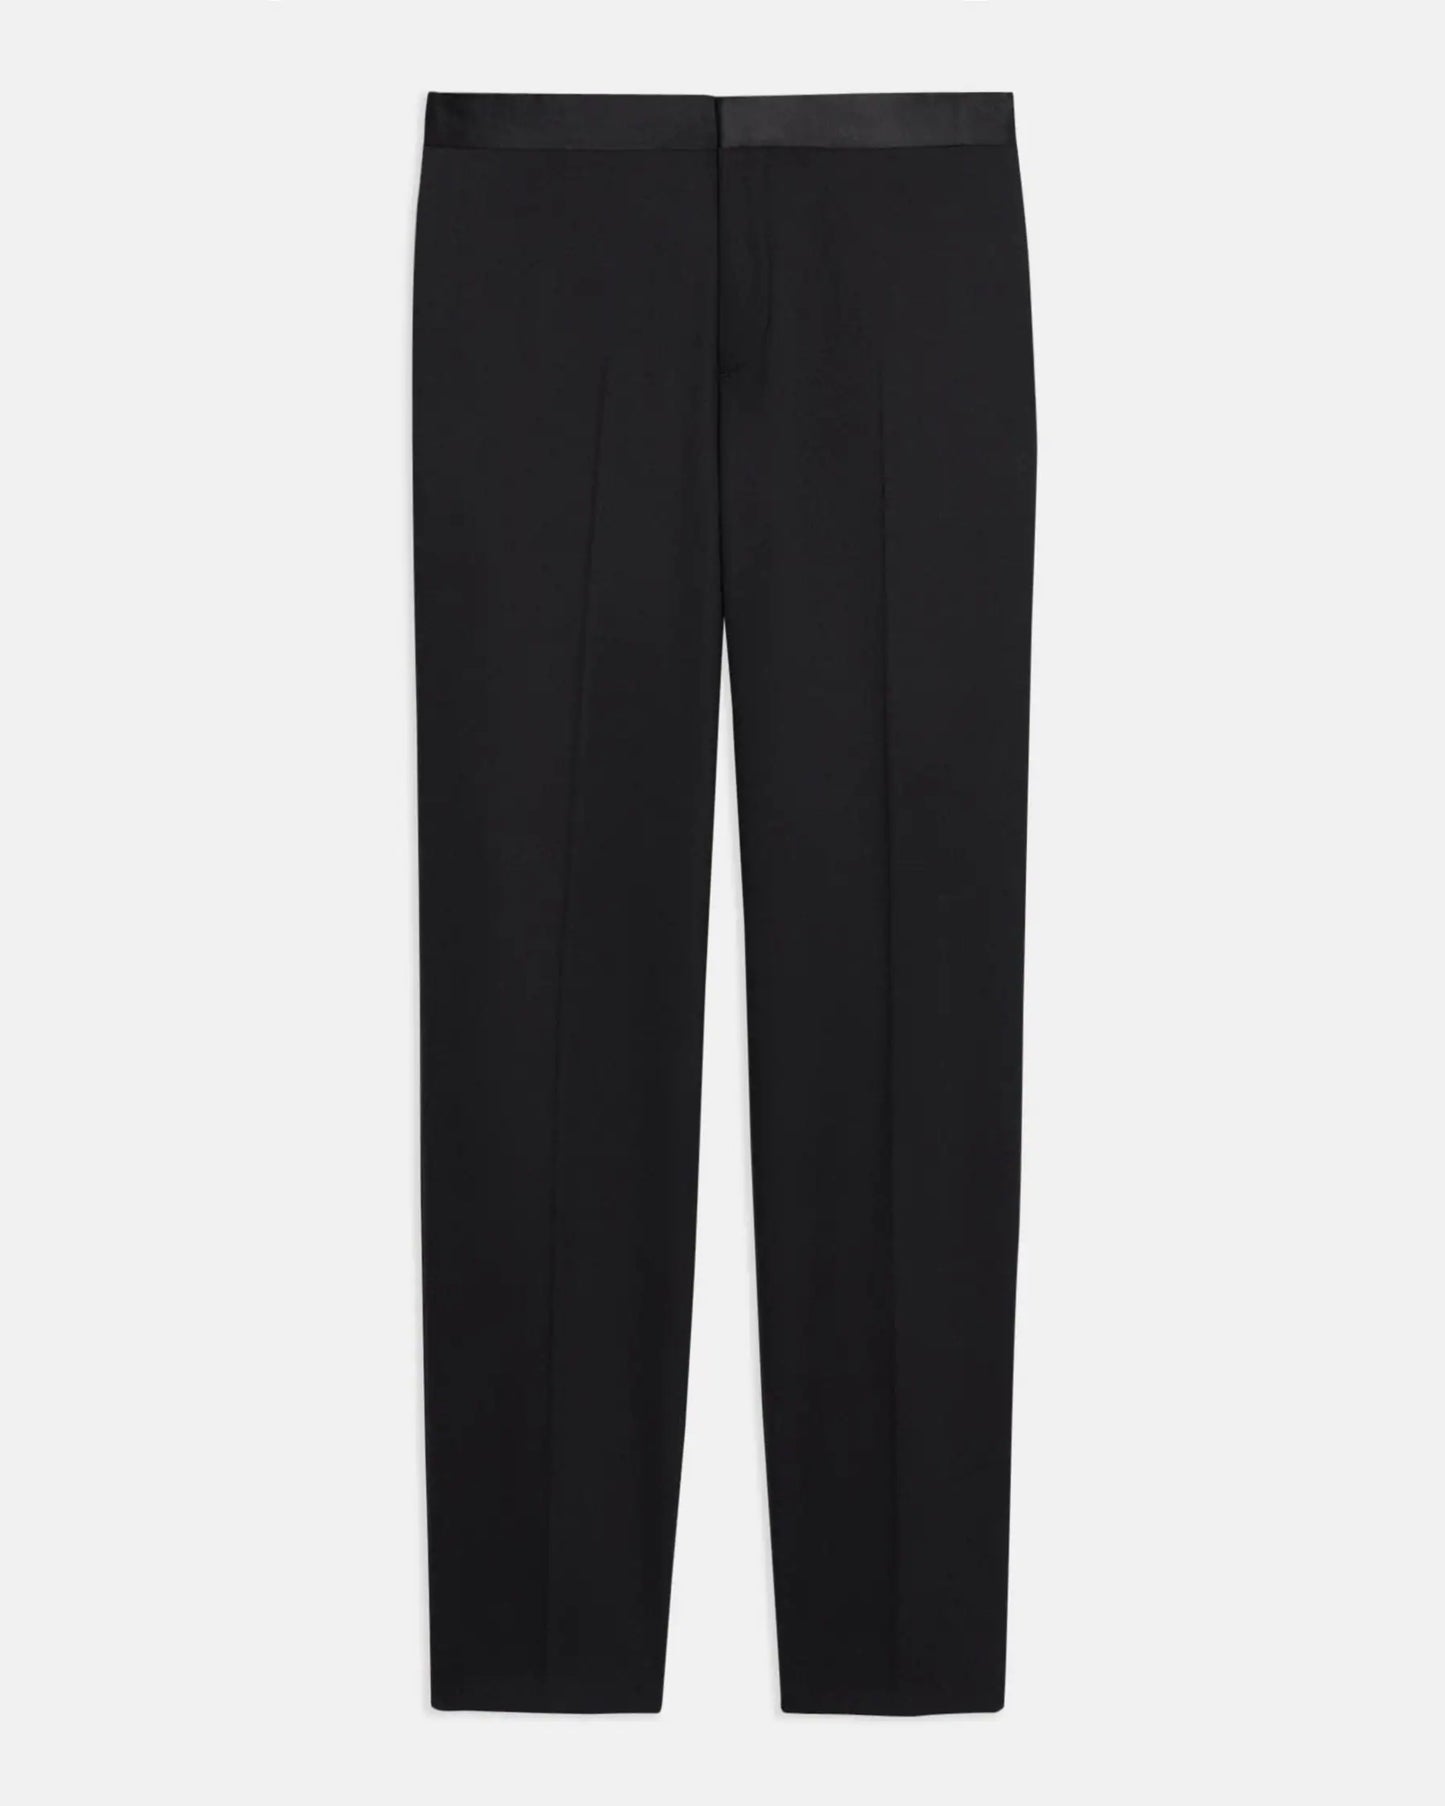 THEORY TUXEDO PANT FOR RENT